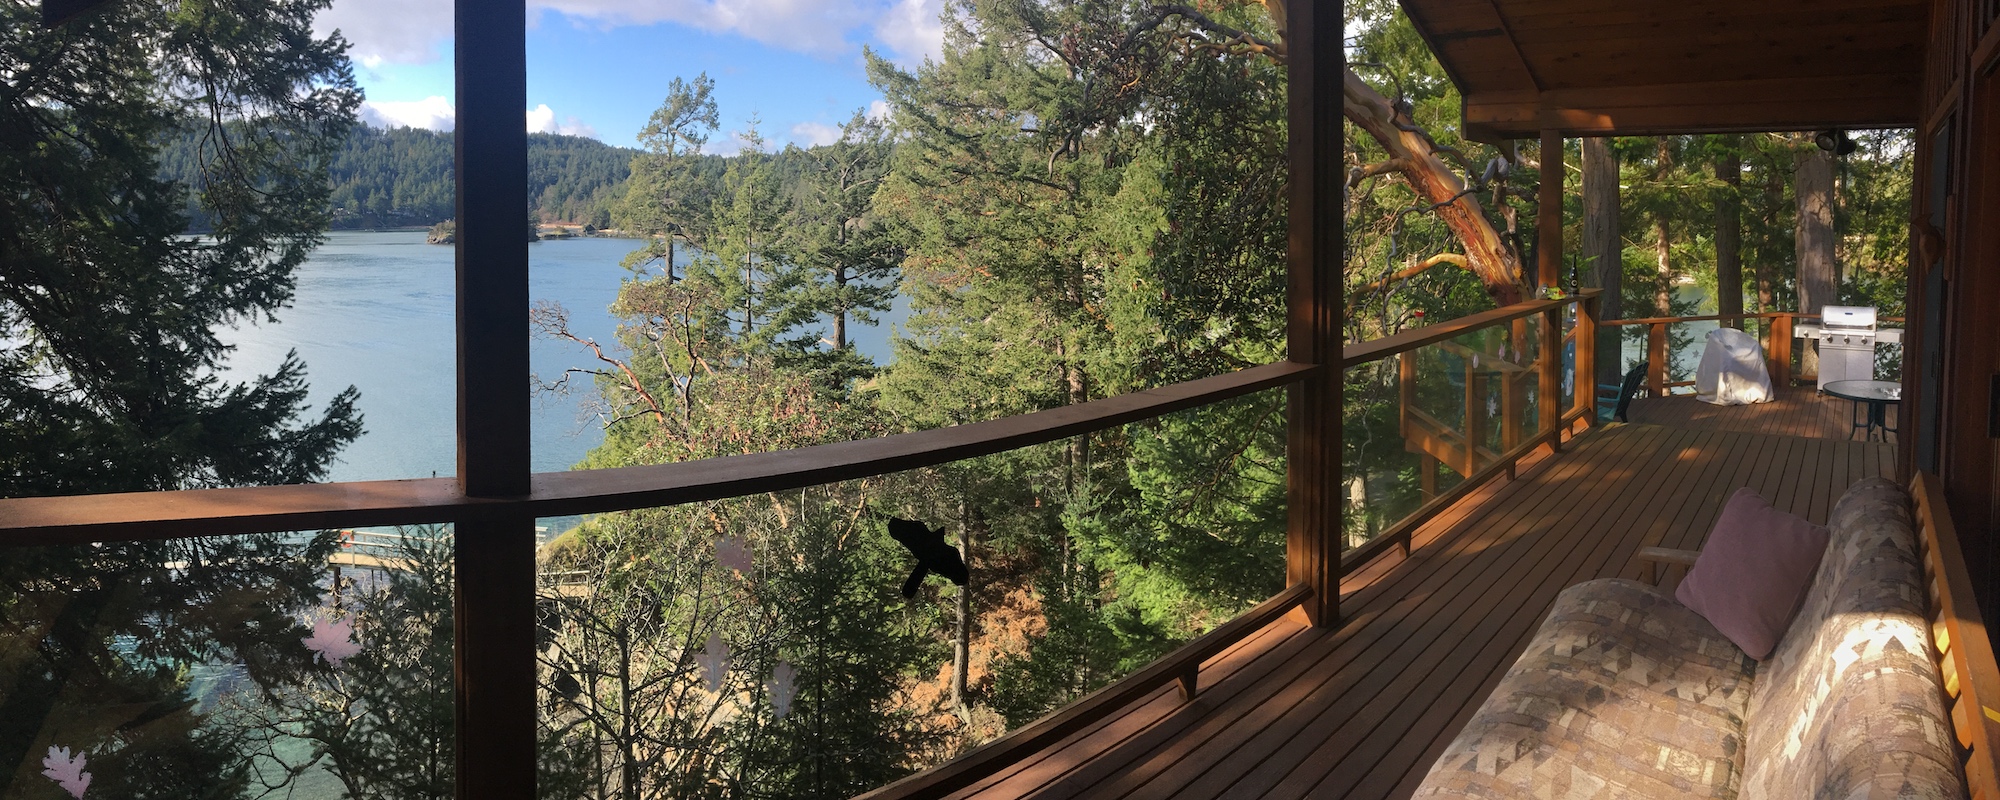 Ainslie Point Cottage vacation rental with ocean views from deck on Pender Island